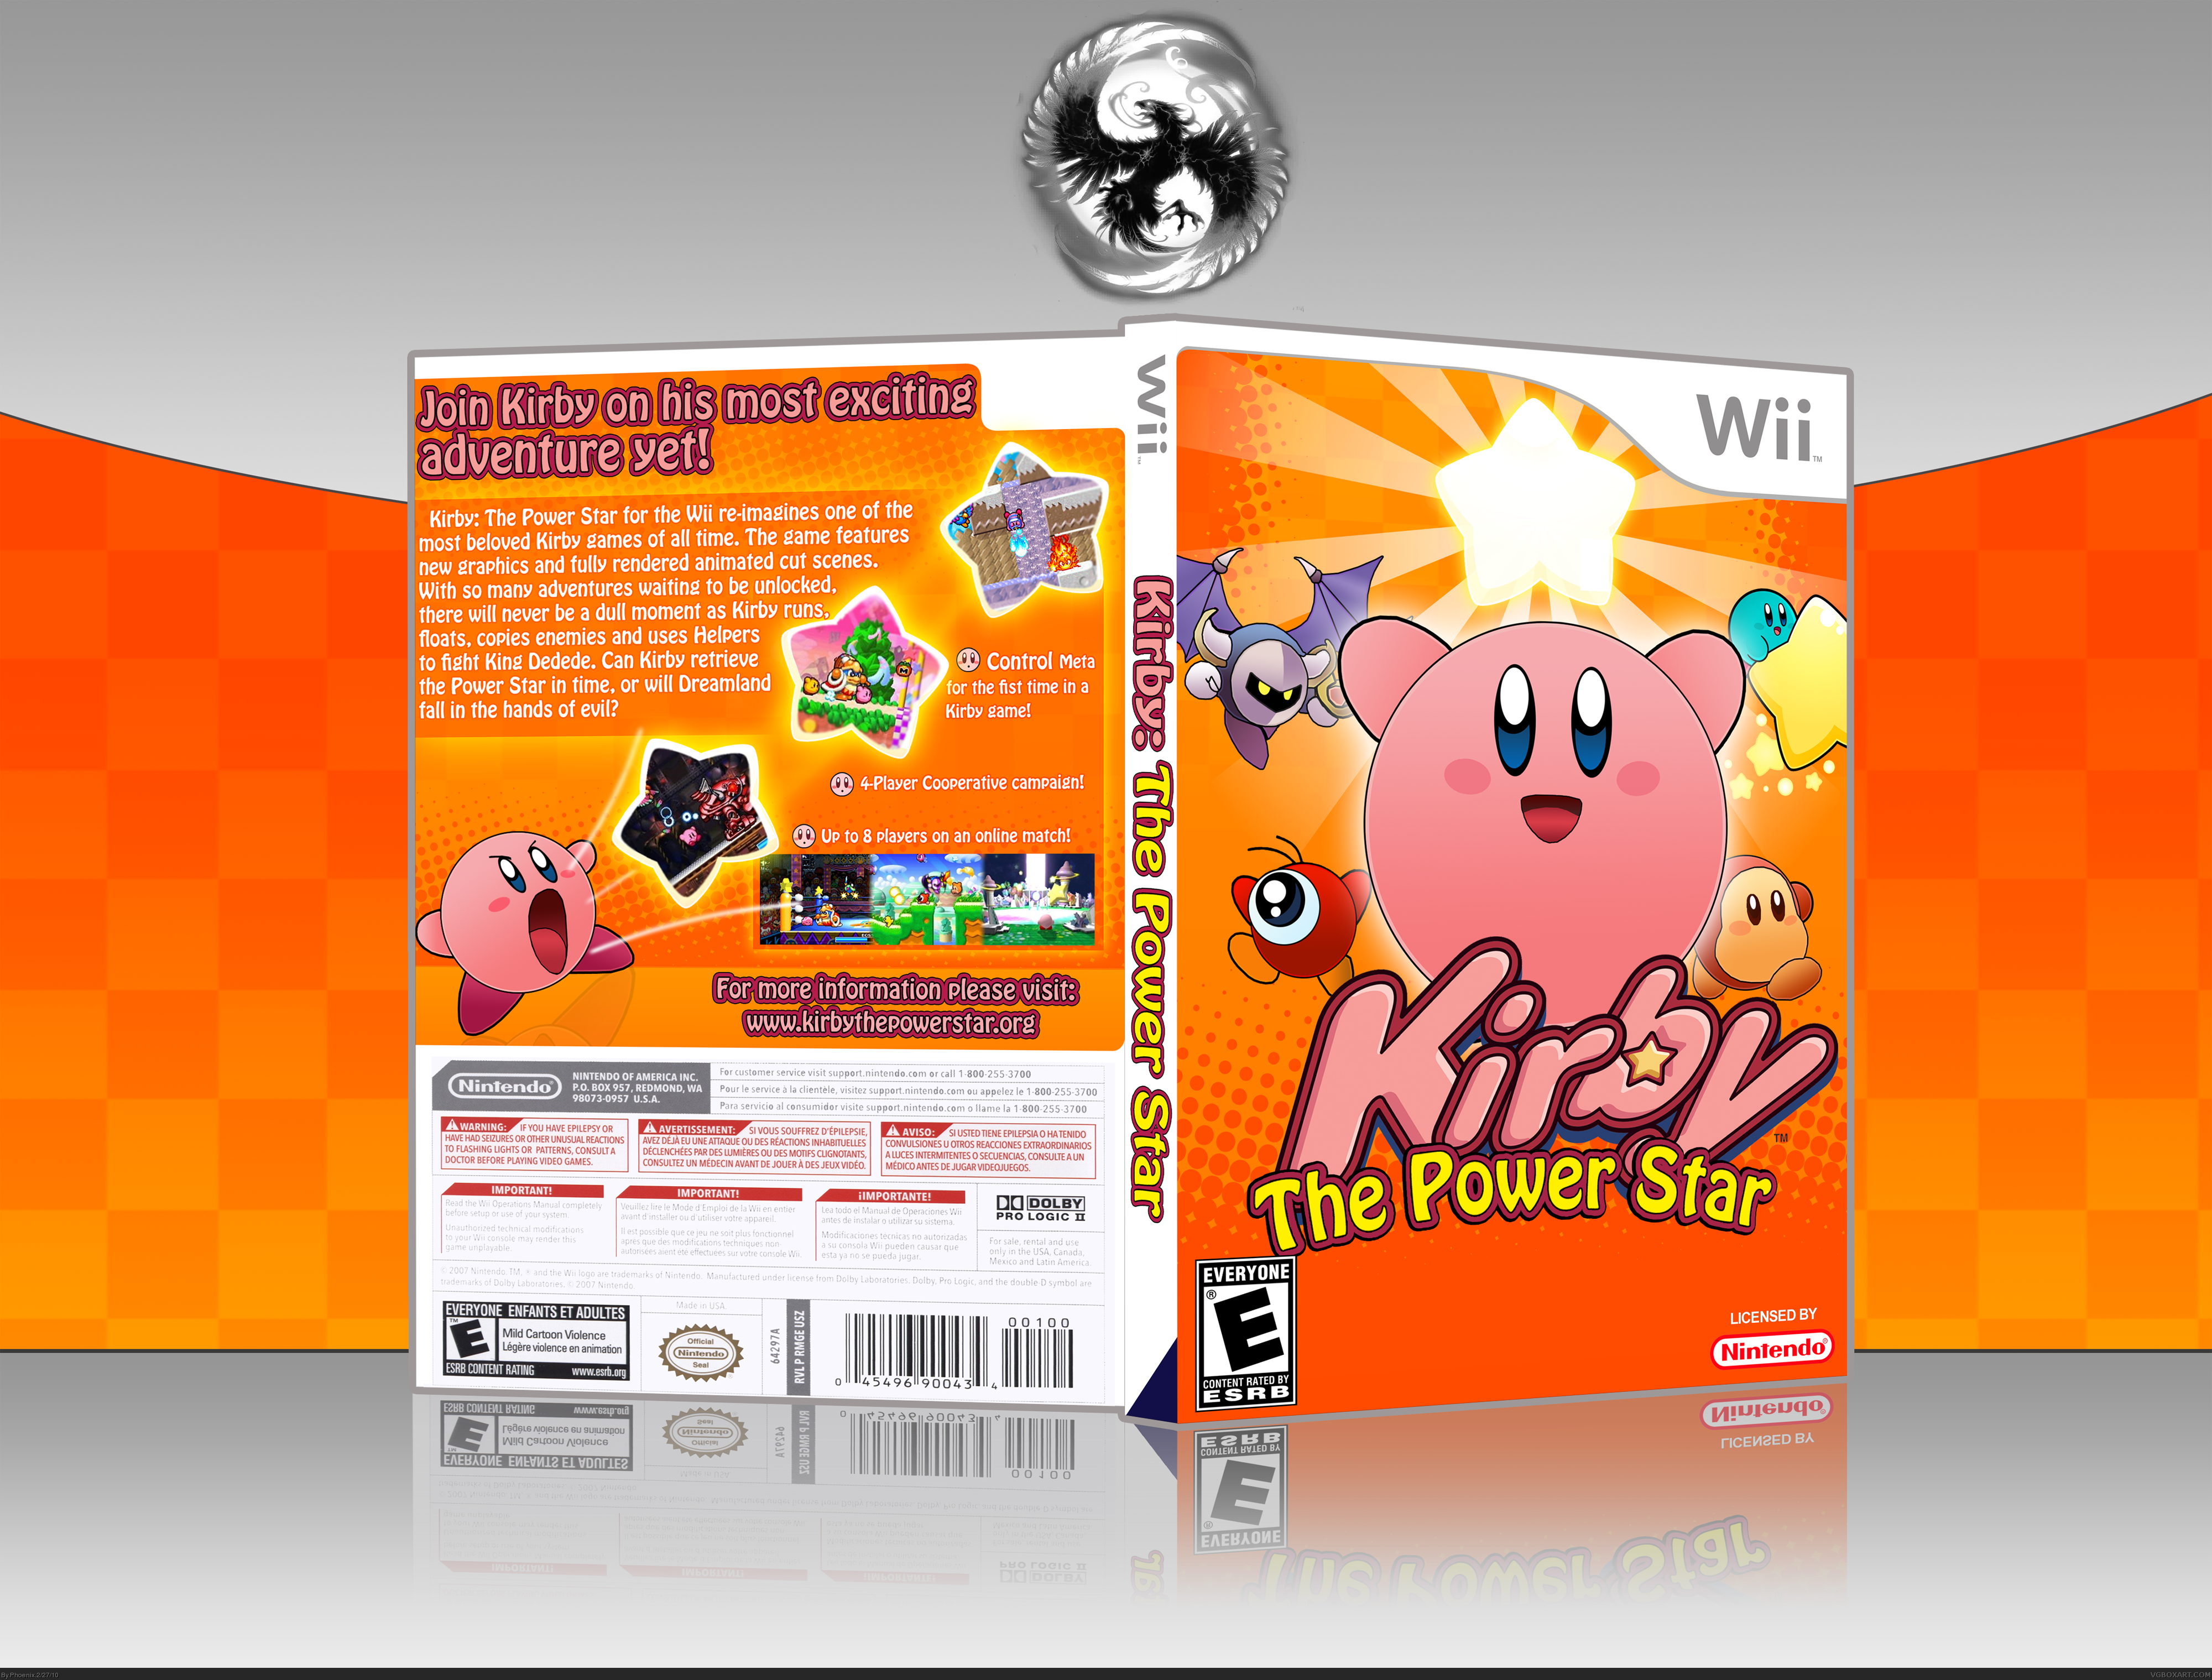 Kirby: The Power Star box cover